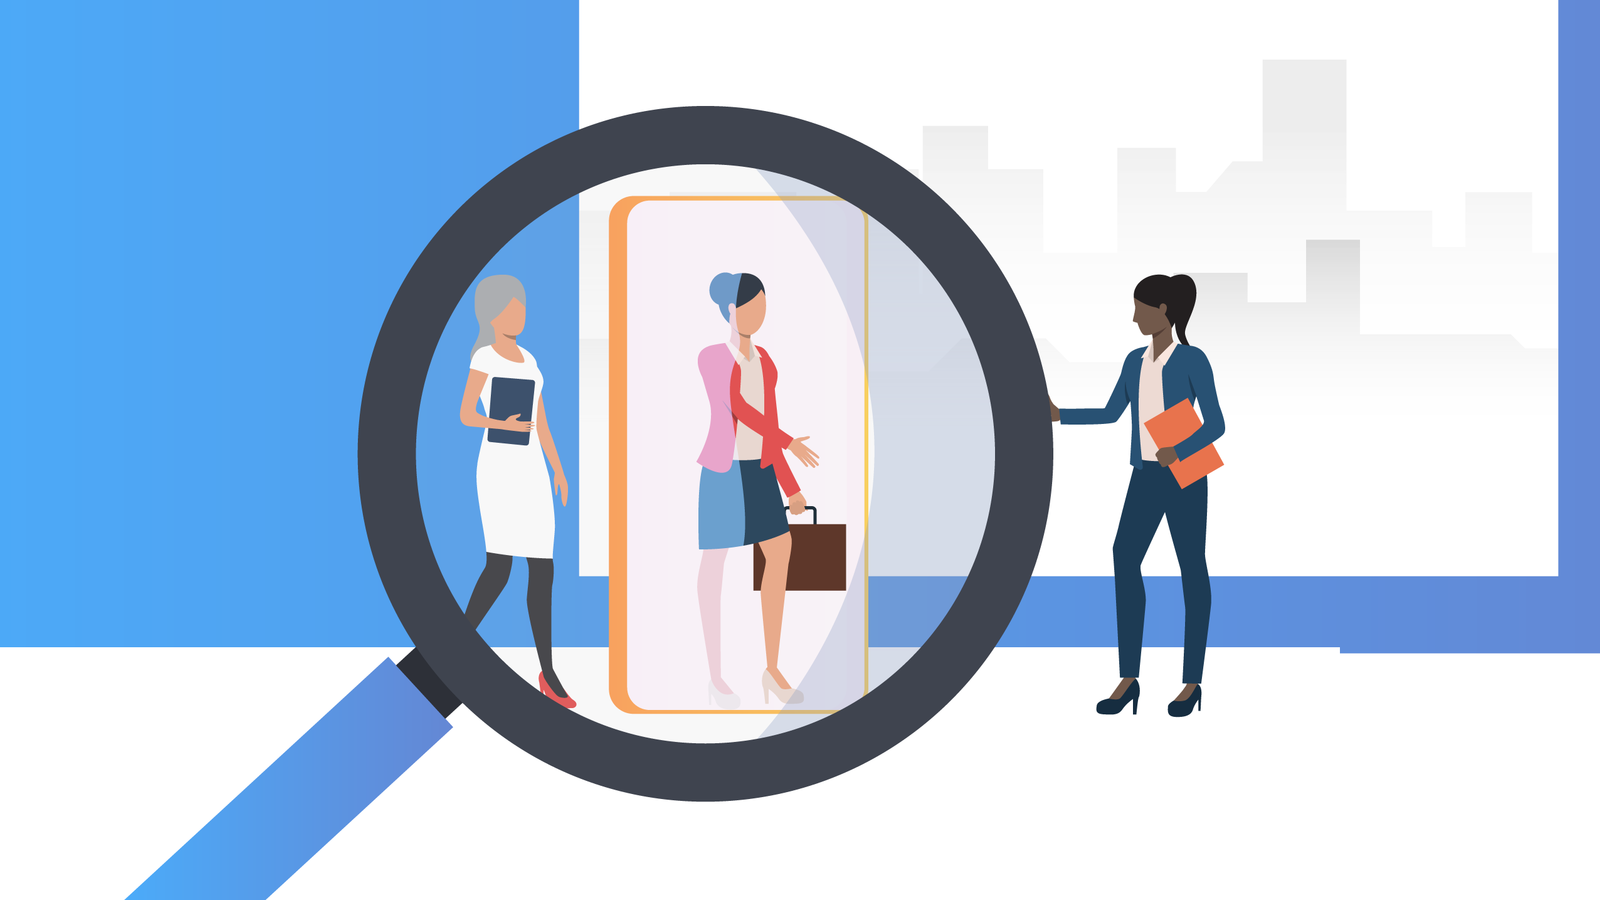 Magnifying glass hovers over woman walking through a door held open by another woman--illustration